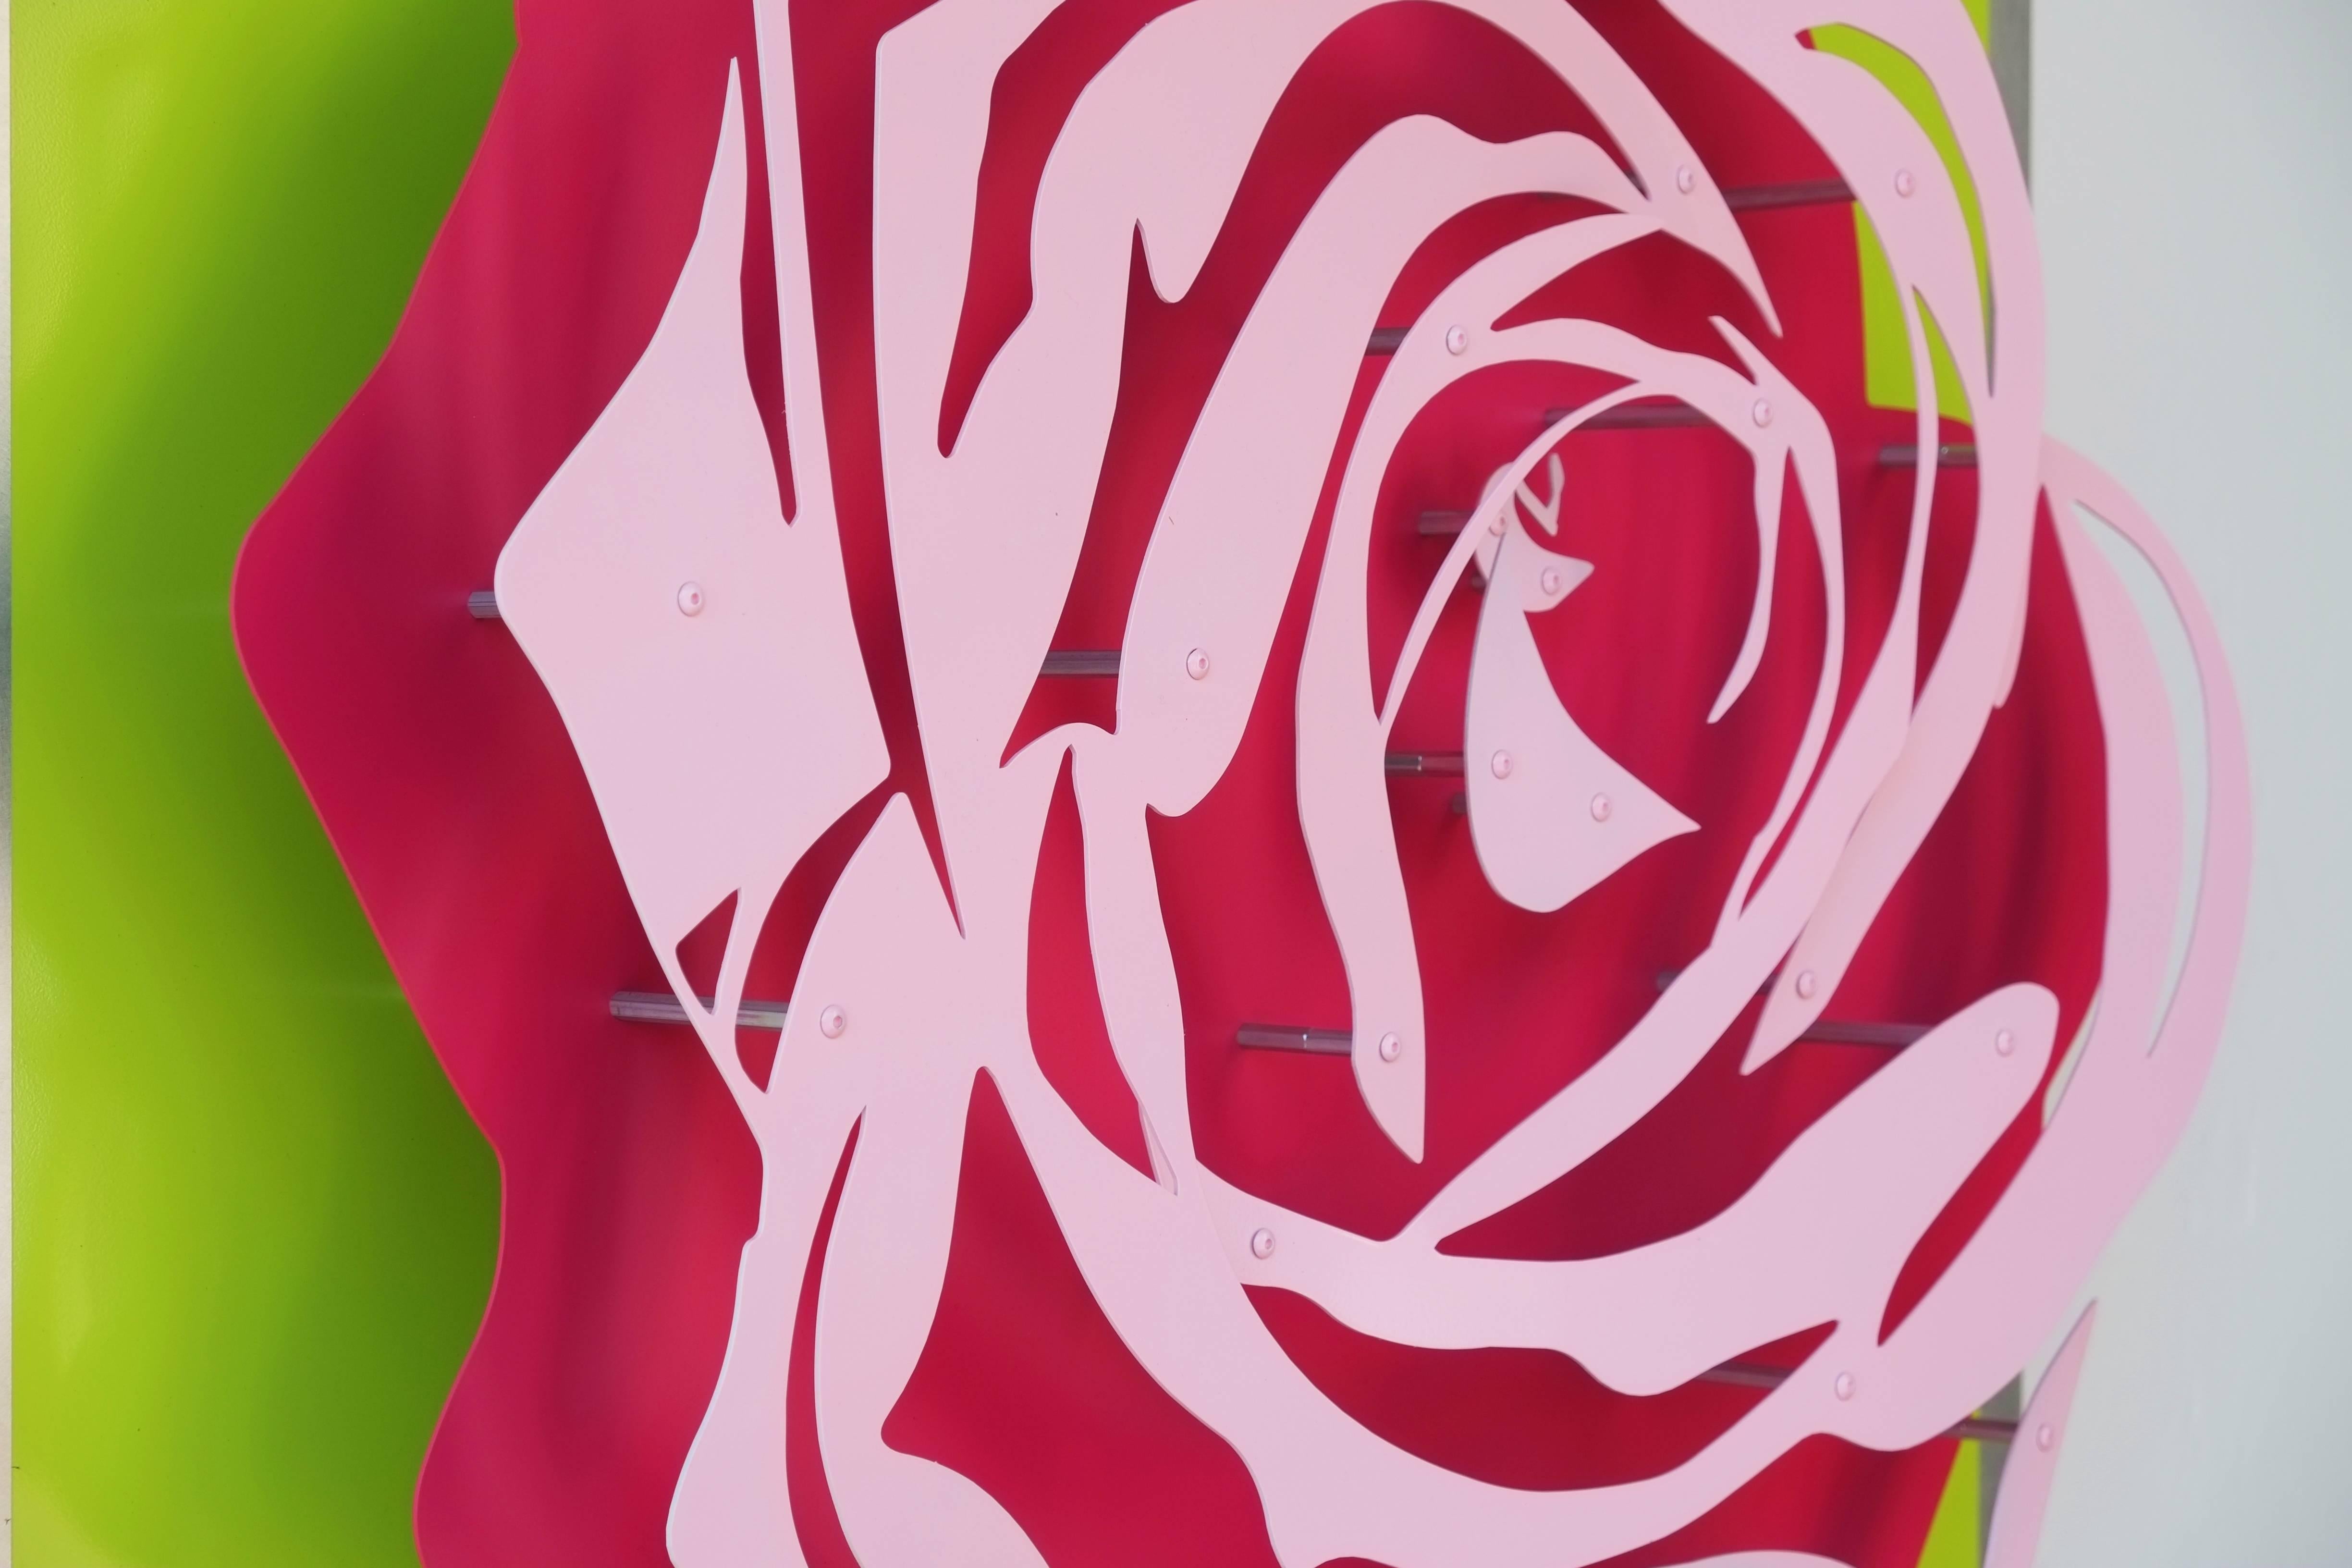 Rose - Pink on Green - Painting by Michael Kalish